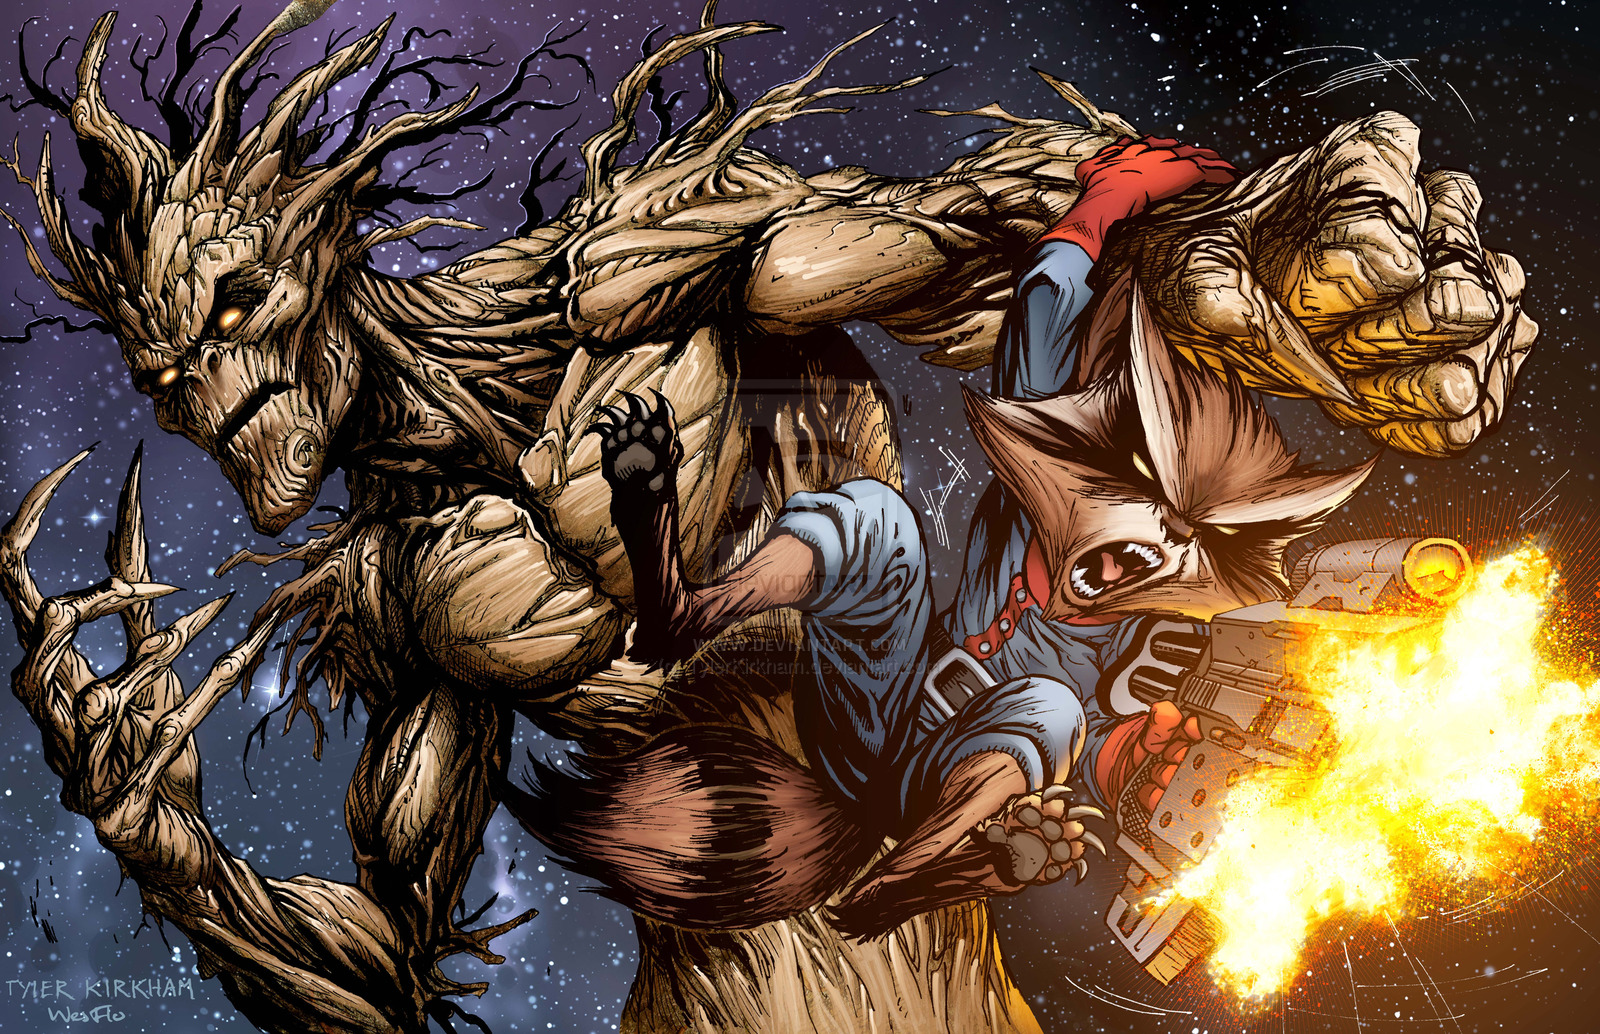 Free download Rocket Raccoon and Groot by TylerKirkham [1600x1034] for your Desktop, Mobile & Tablet. Explore Rocket Raccoon Wallpaper. HD Rocket Raccoon Wallpaper, Rocket and Groot Wallpaper, Guardians of